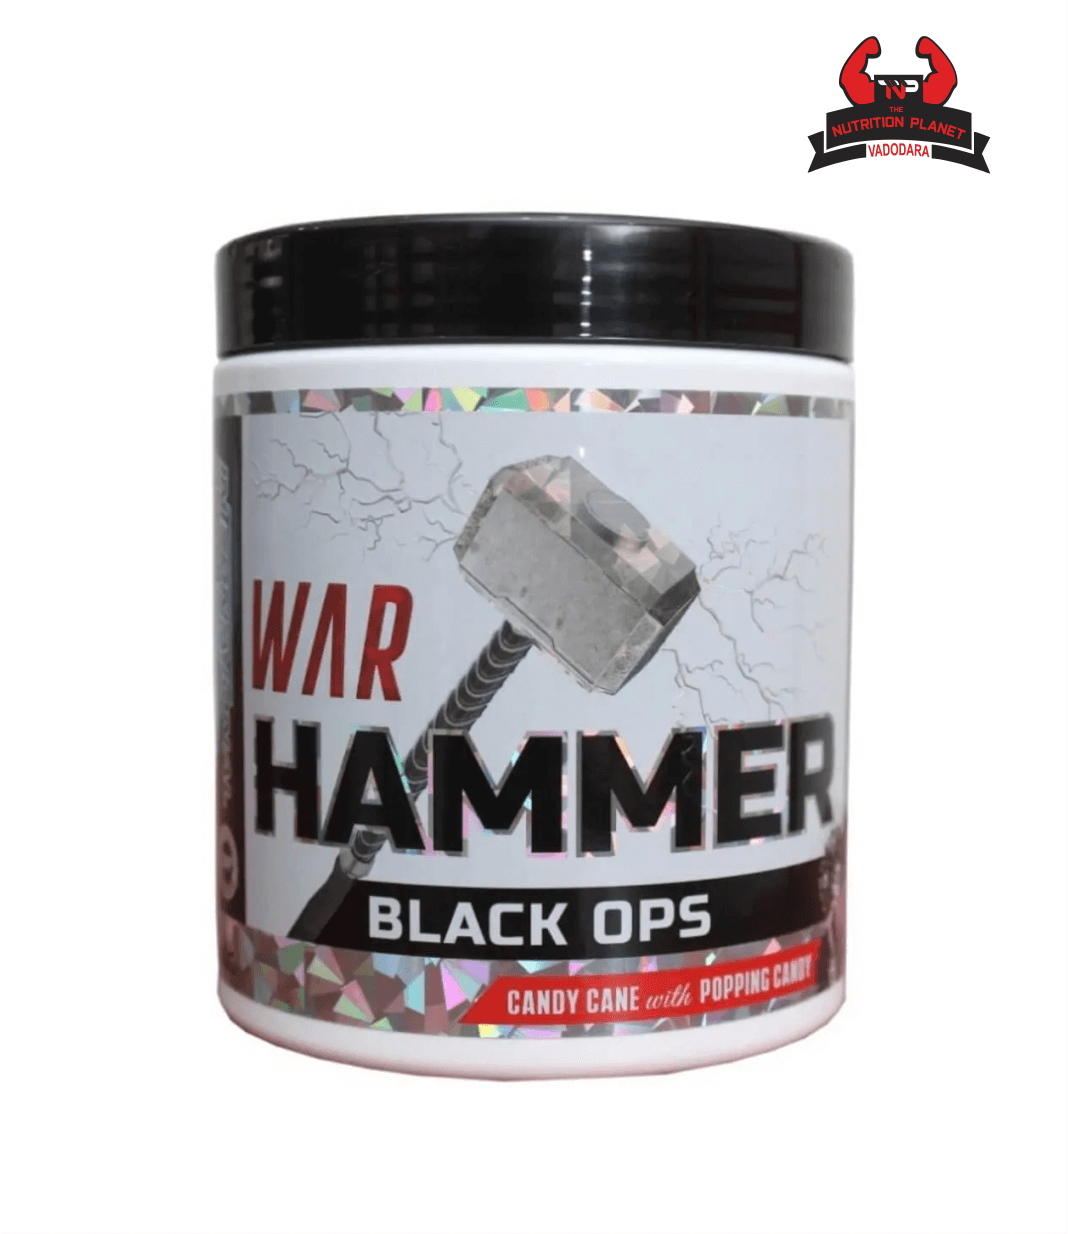 Internatioal Protein War Hammer Black Ops Flavor Candy cane with popping candy